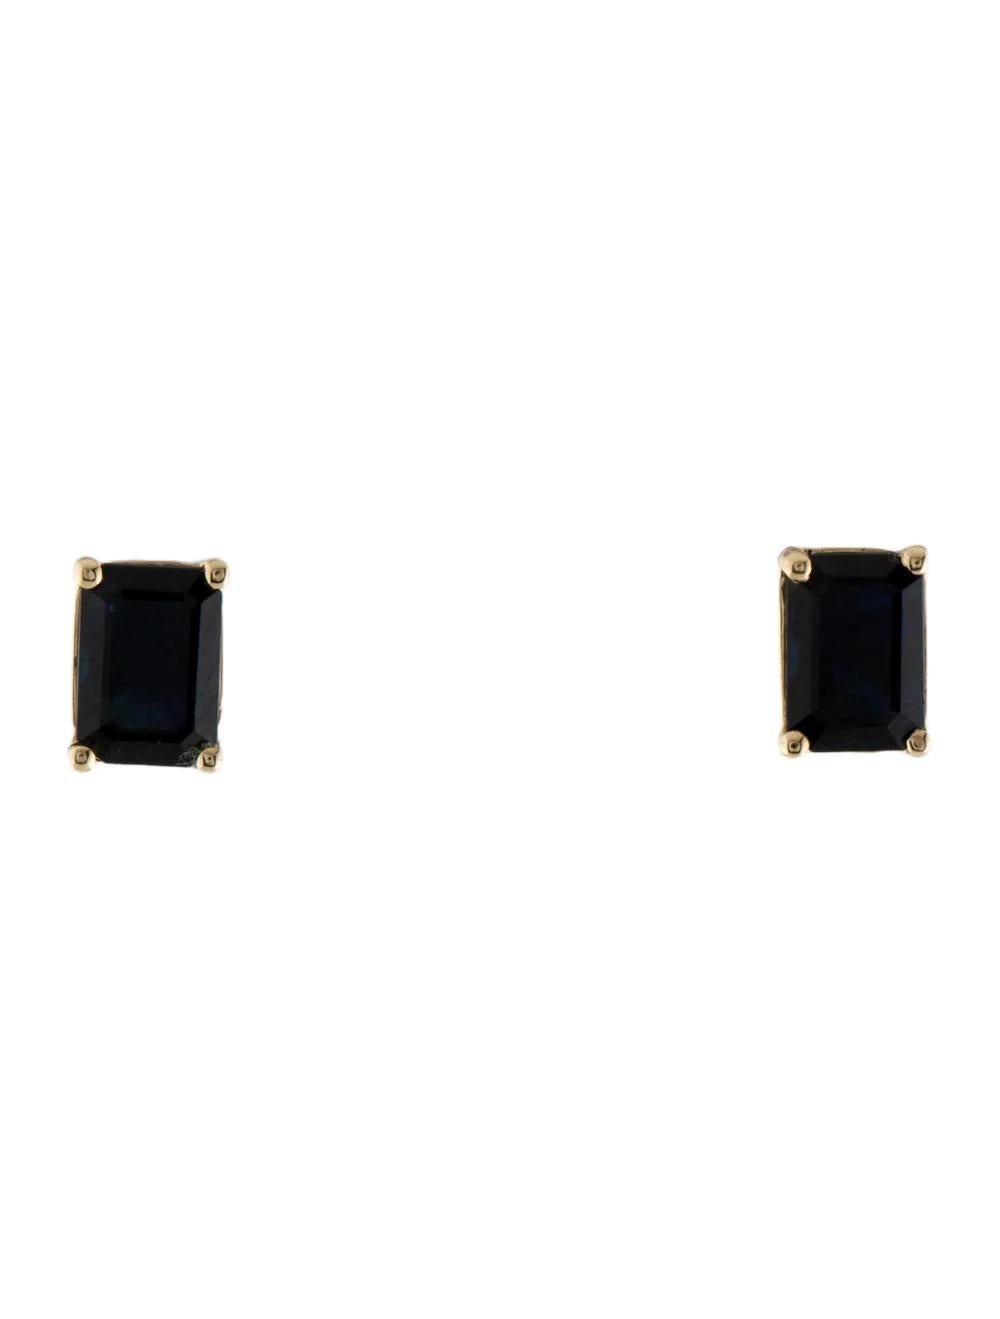 Indulge in timeless elegance with these stunning 14K Yellow Gold Sapphire Stud Earrings. Each earring features a mesmerizing 2.42 Carat Cut Cornered Rectangular Step Cut Sapphire, radiating sophistication and charm.

Specifications:

* Metal Type: